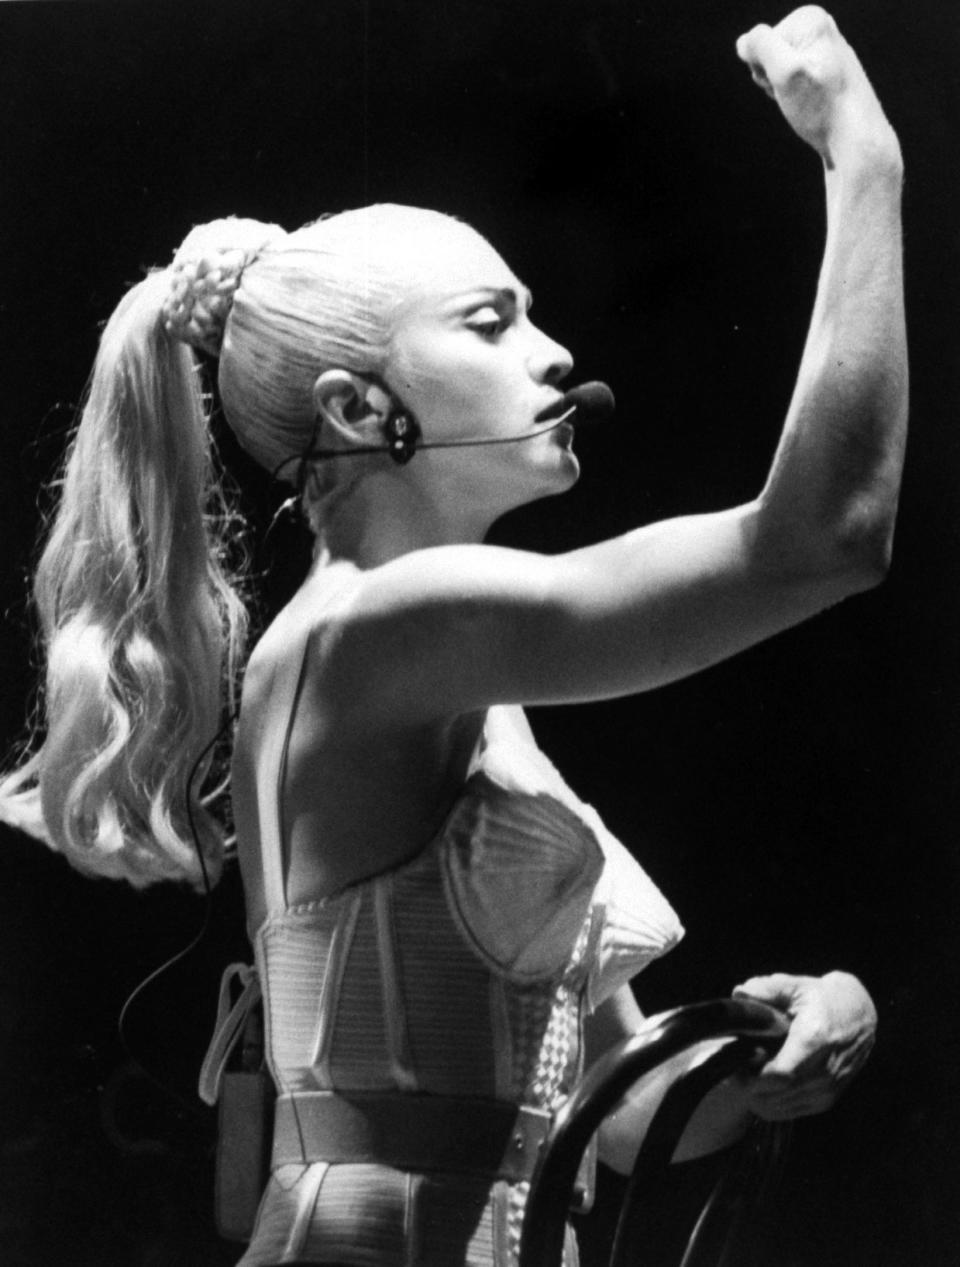 Madonna’s iconic cone corset during her ‘Blonde Ambition’ tour [Photo: Getty]